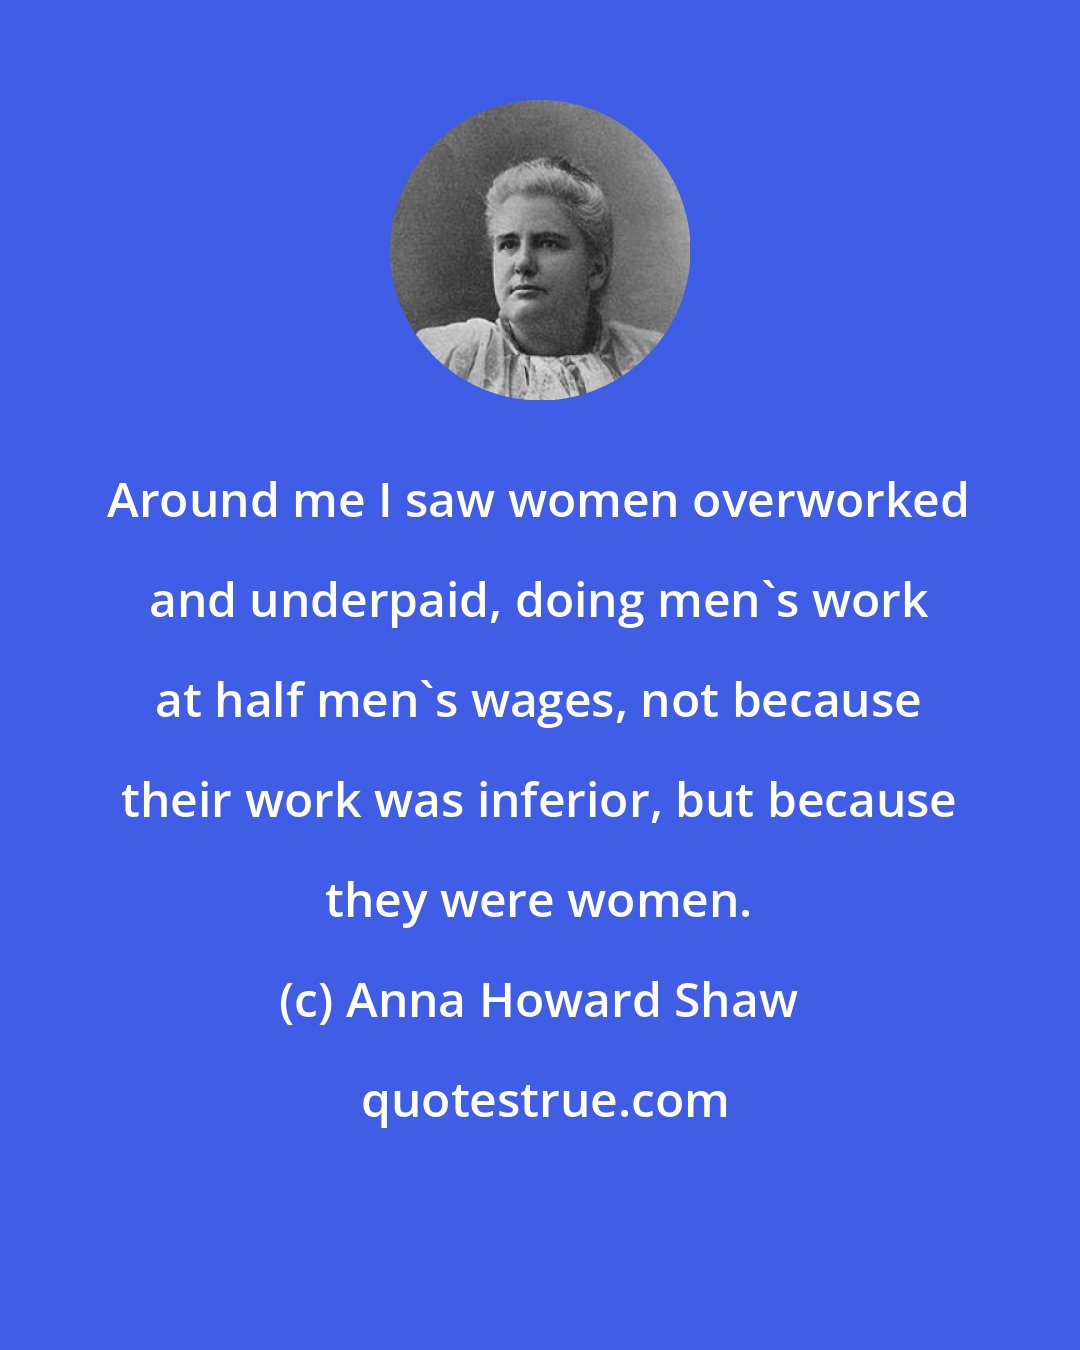 Anna Howard Shaw: Around me I saw women overworked and underpaid, doing men's work at half men's wages, not because their work was inferior, but because they were women.